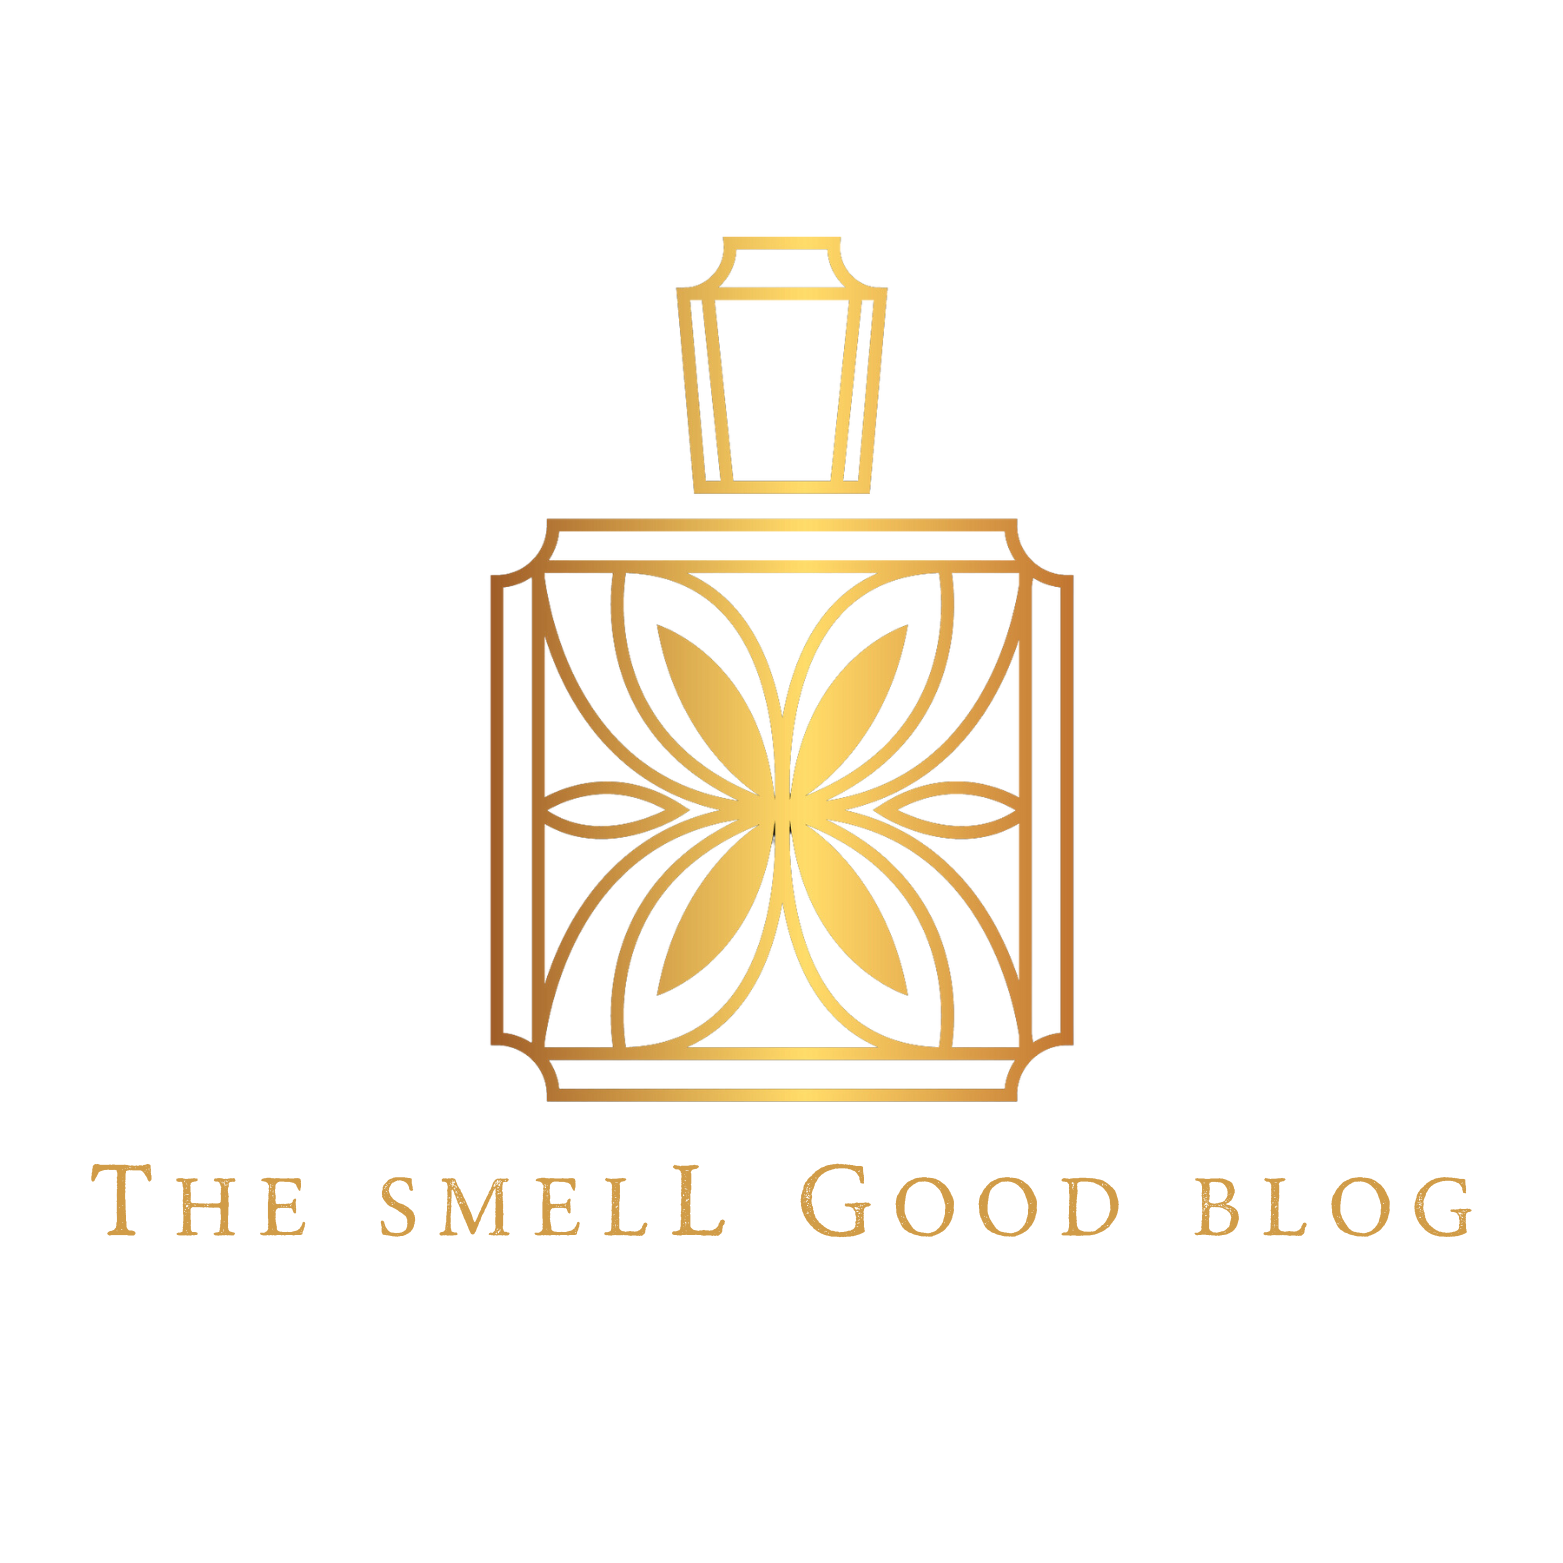 The Smell Good Blog